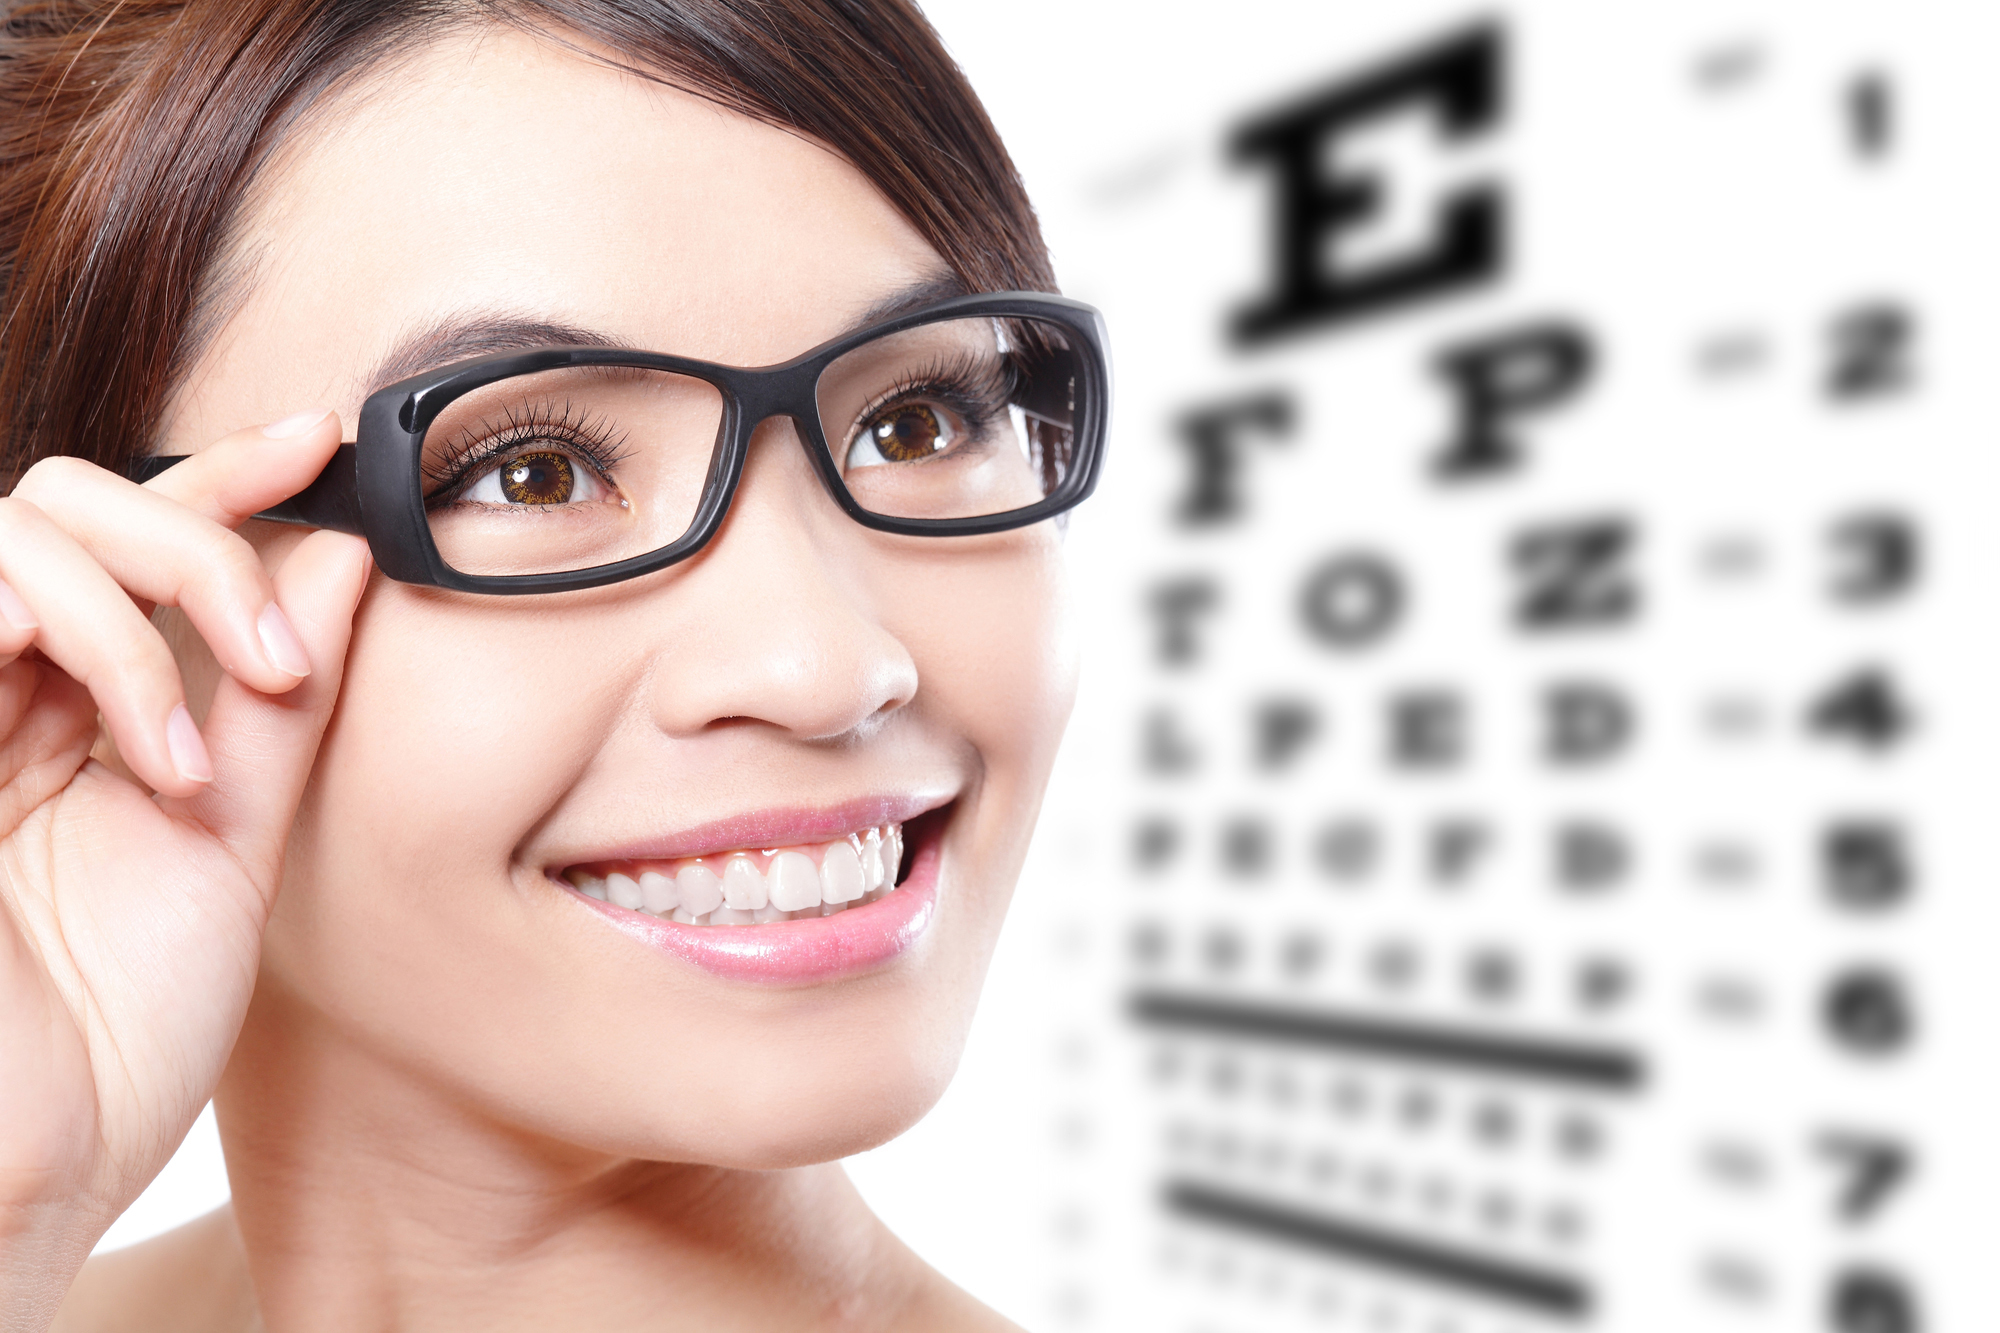 Woman with Glasses and an Eye Chart